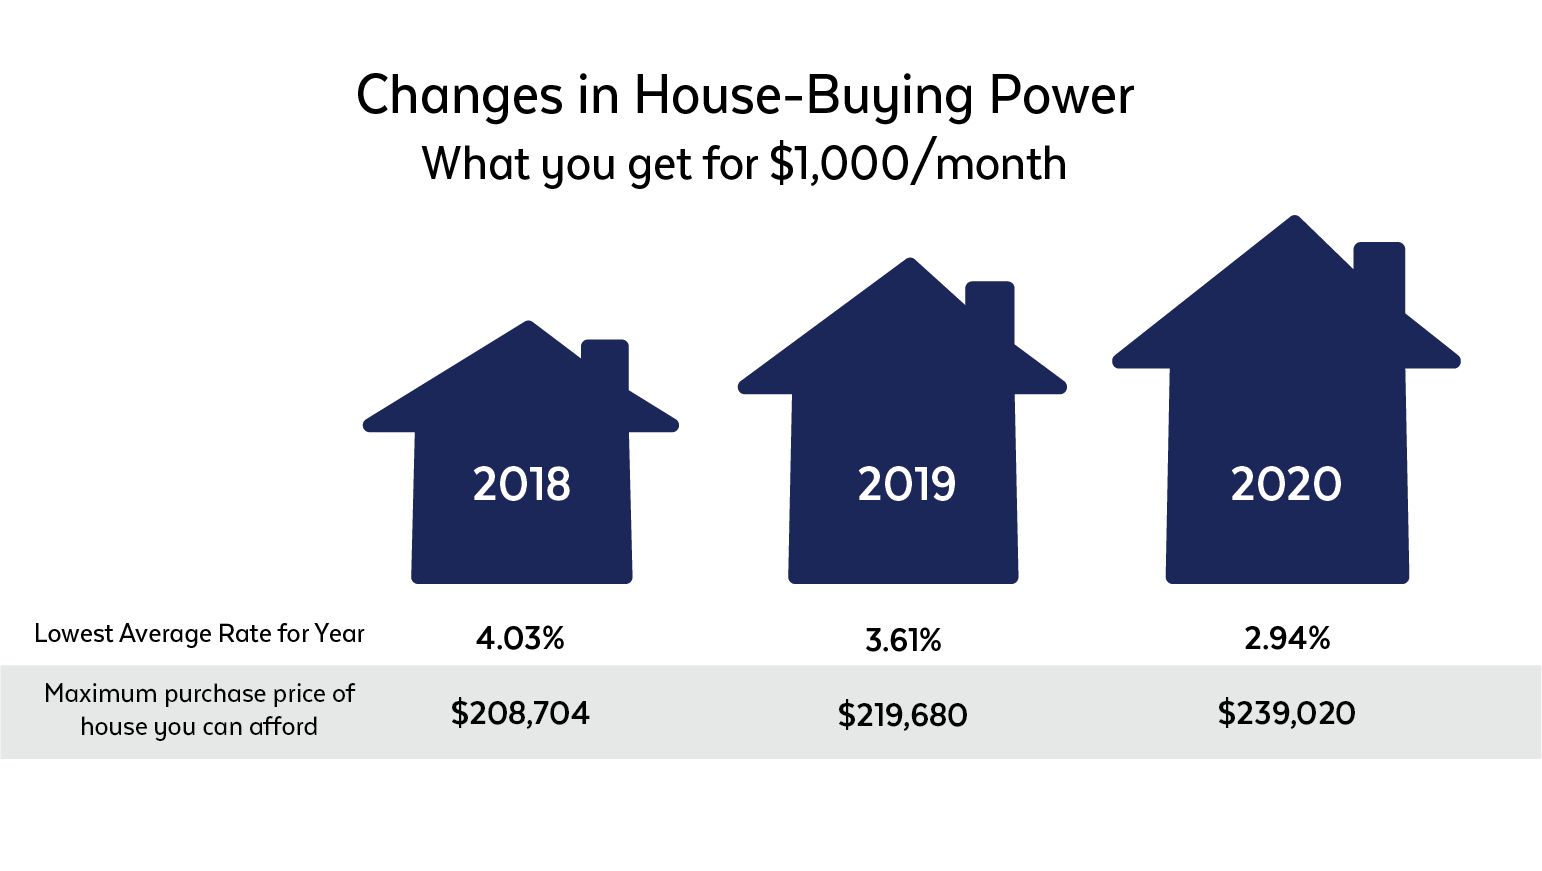 Changes in House-Buying Power